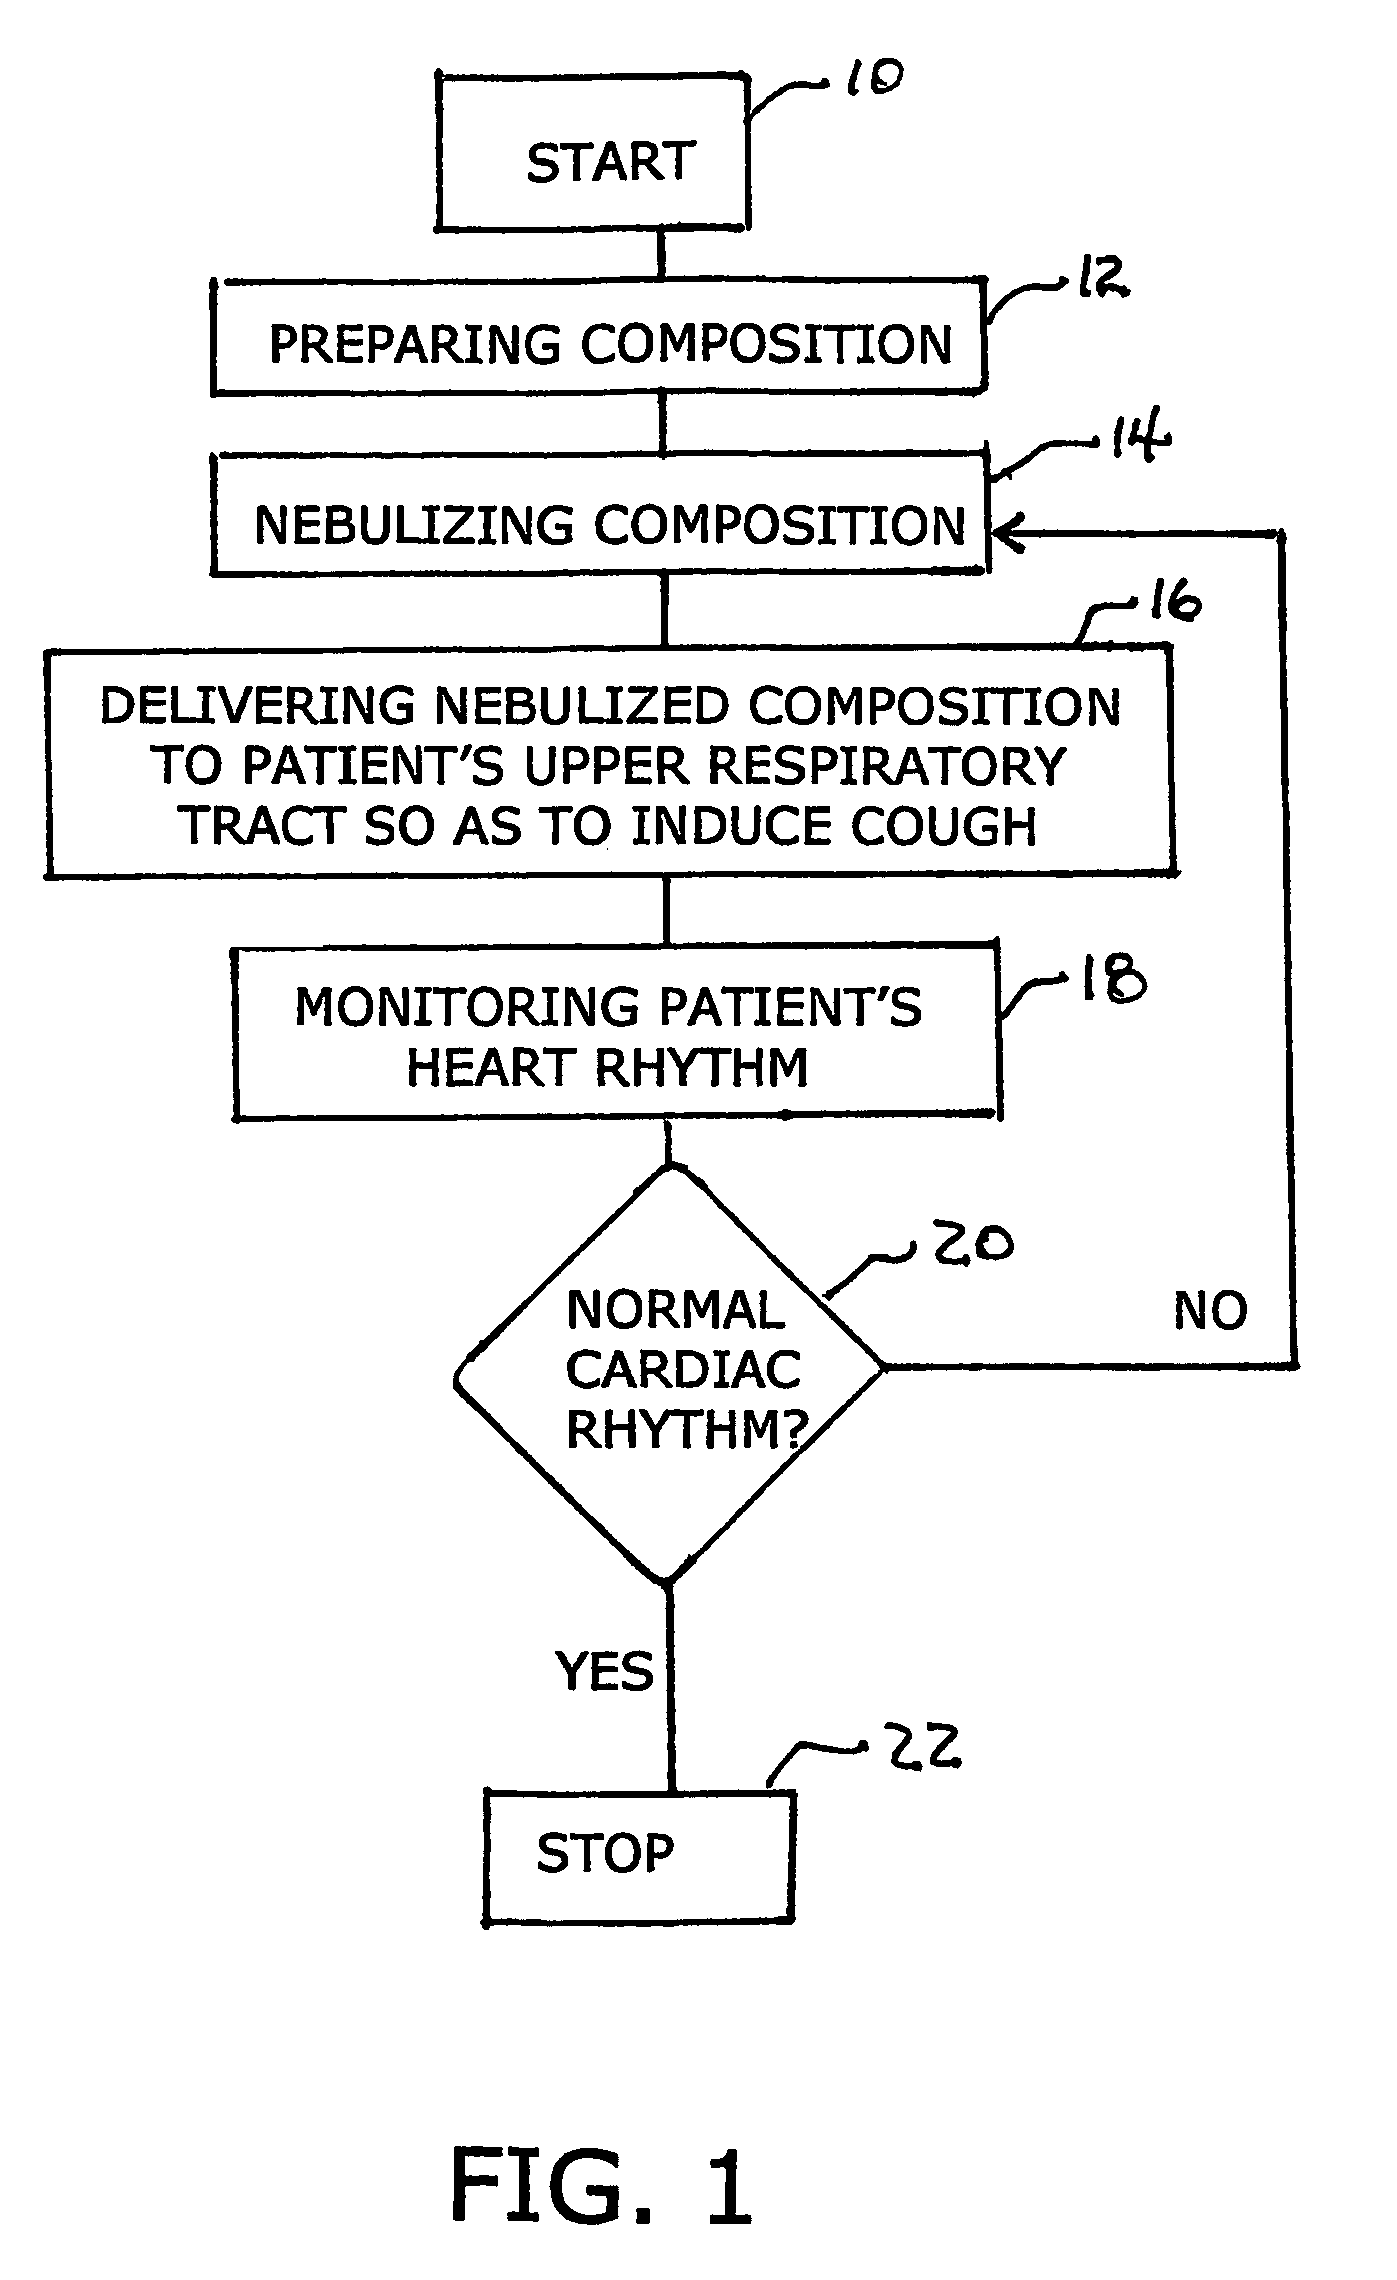 Apparatus and method for self-induced cough cardiopulmonary resuscitation